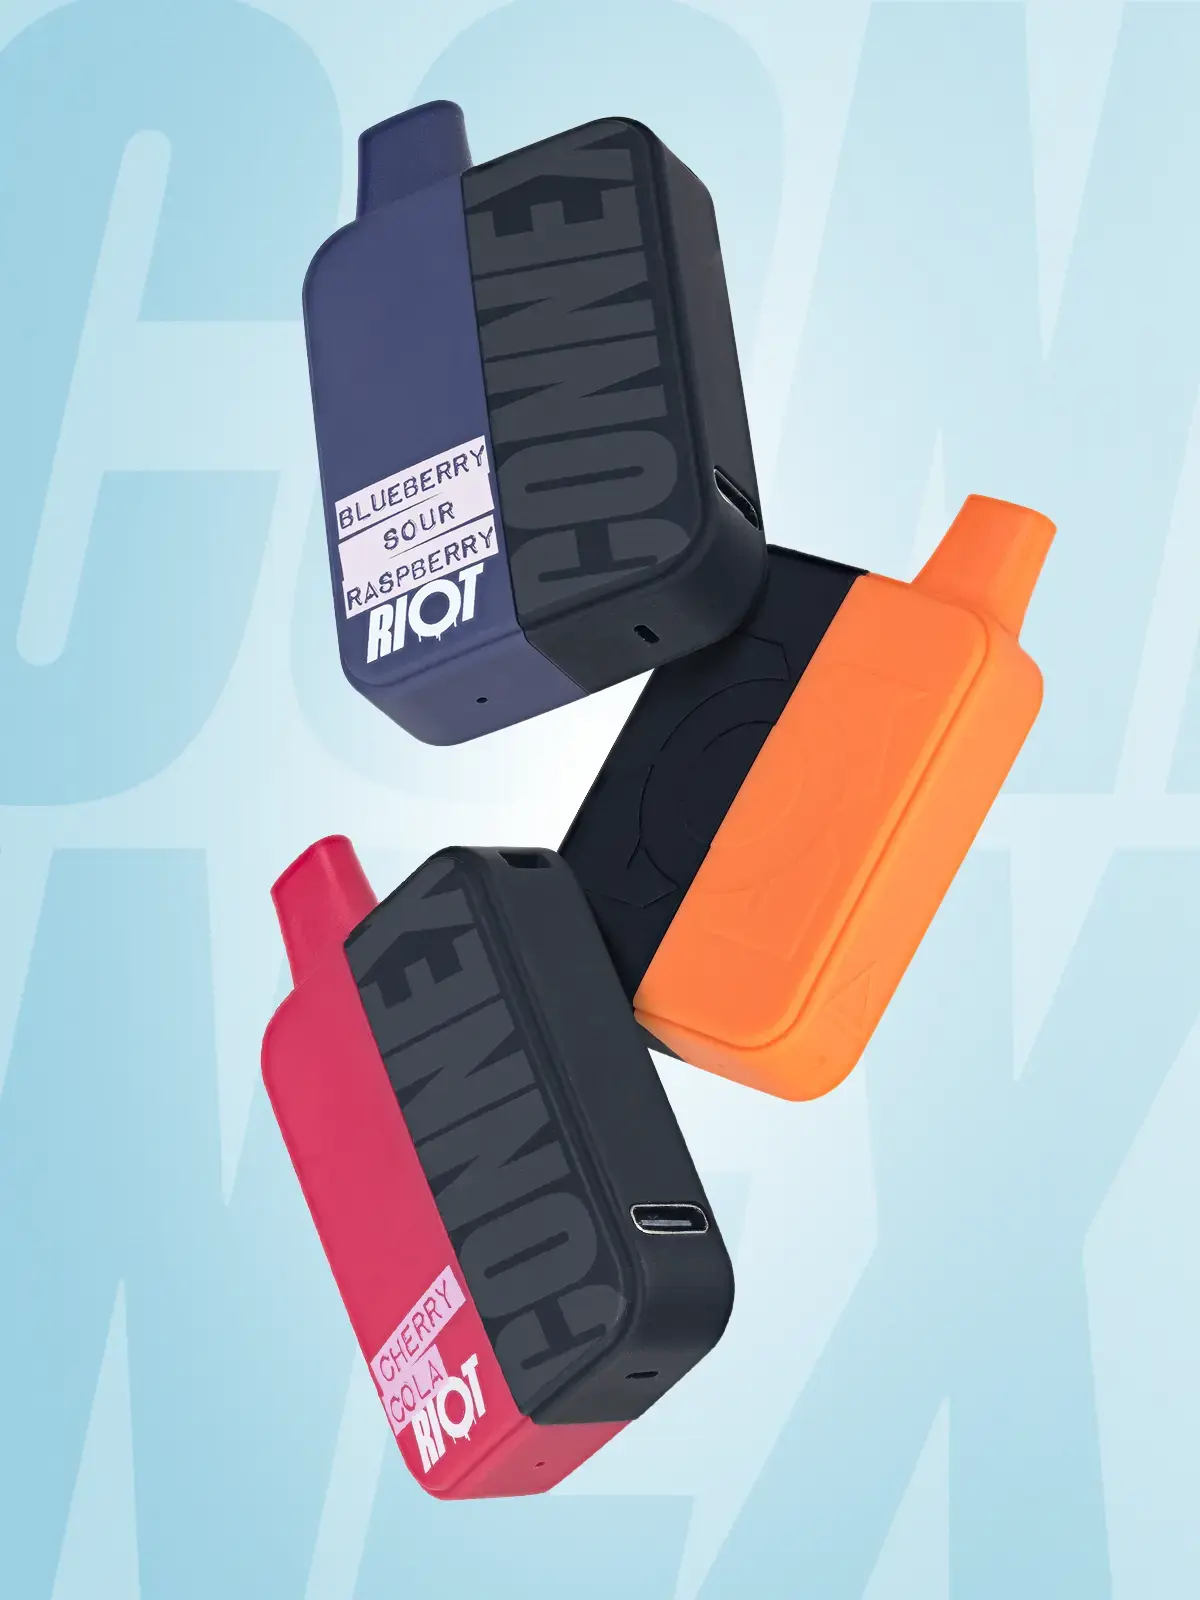 Three RIOT Connex devices with various flavors; Blueberry Sour Raspberry, Cherry Cola and Mango Peach Pie floating in front of a blue background